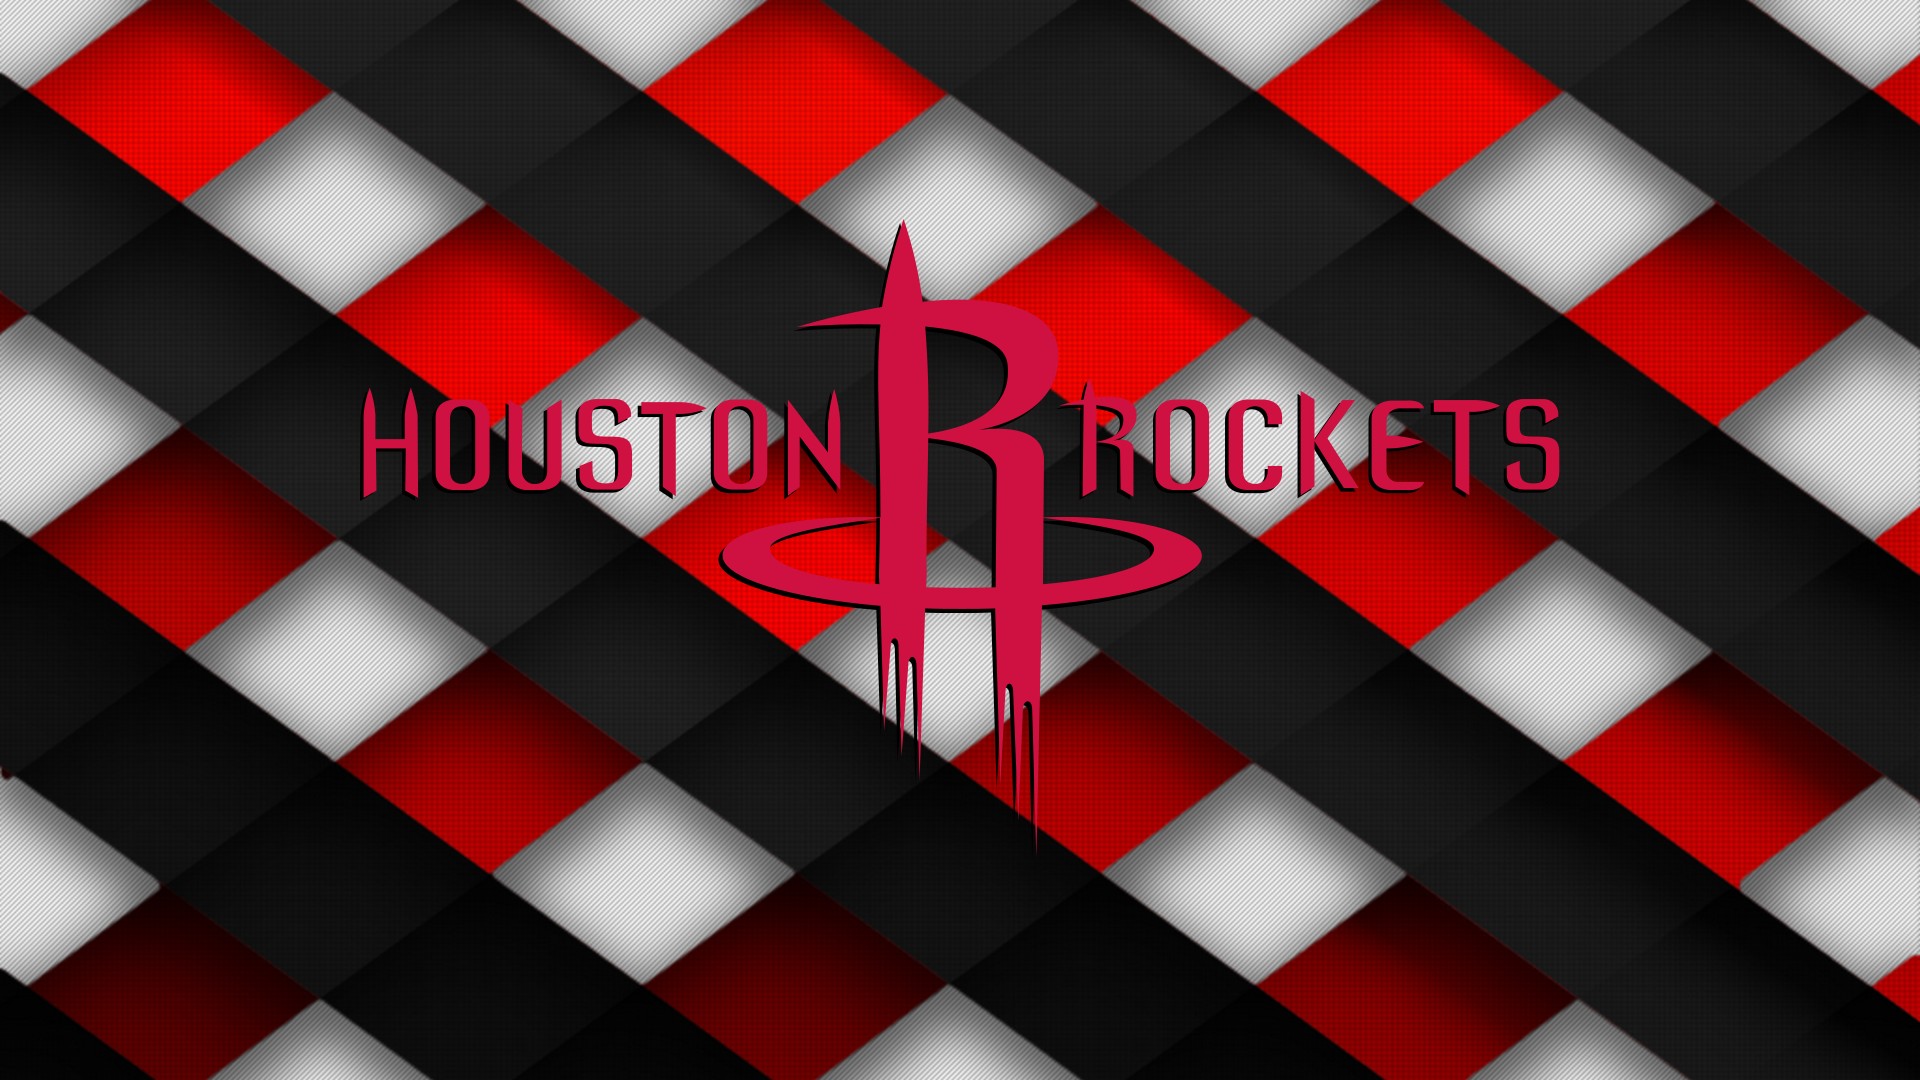 Rockets Desktop Wallpapers with image dimensions 1920x1080 pixel. You can make this wallpaper for your Desktop Computer Backgrounds, Windows or Mac Screensavers, iPhone Lock screen, Tablet or Android and another Mobile Phone device